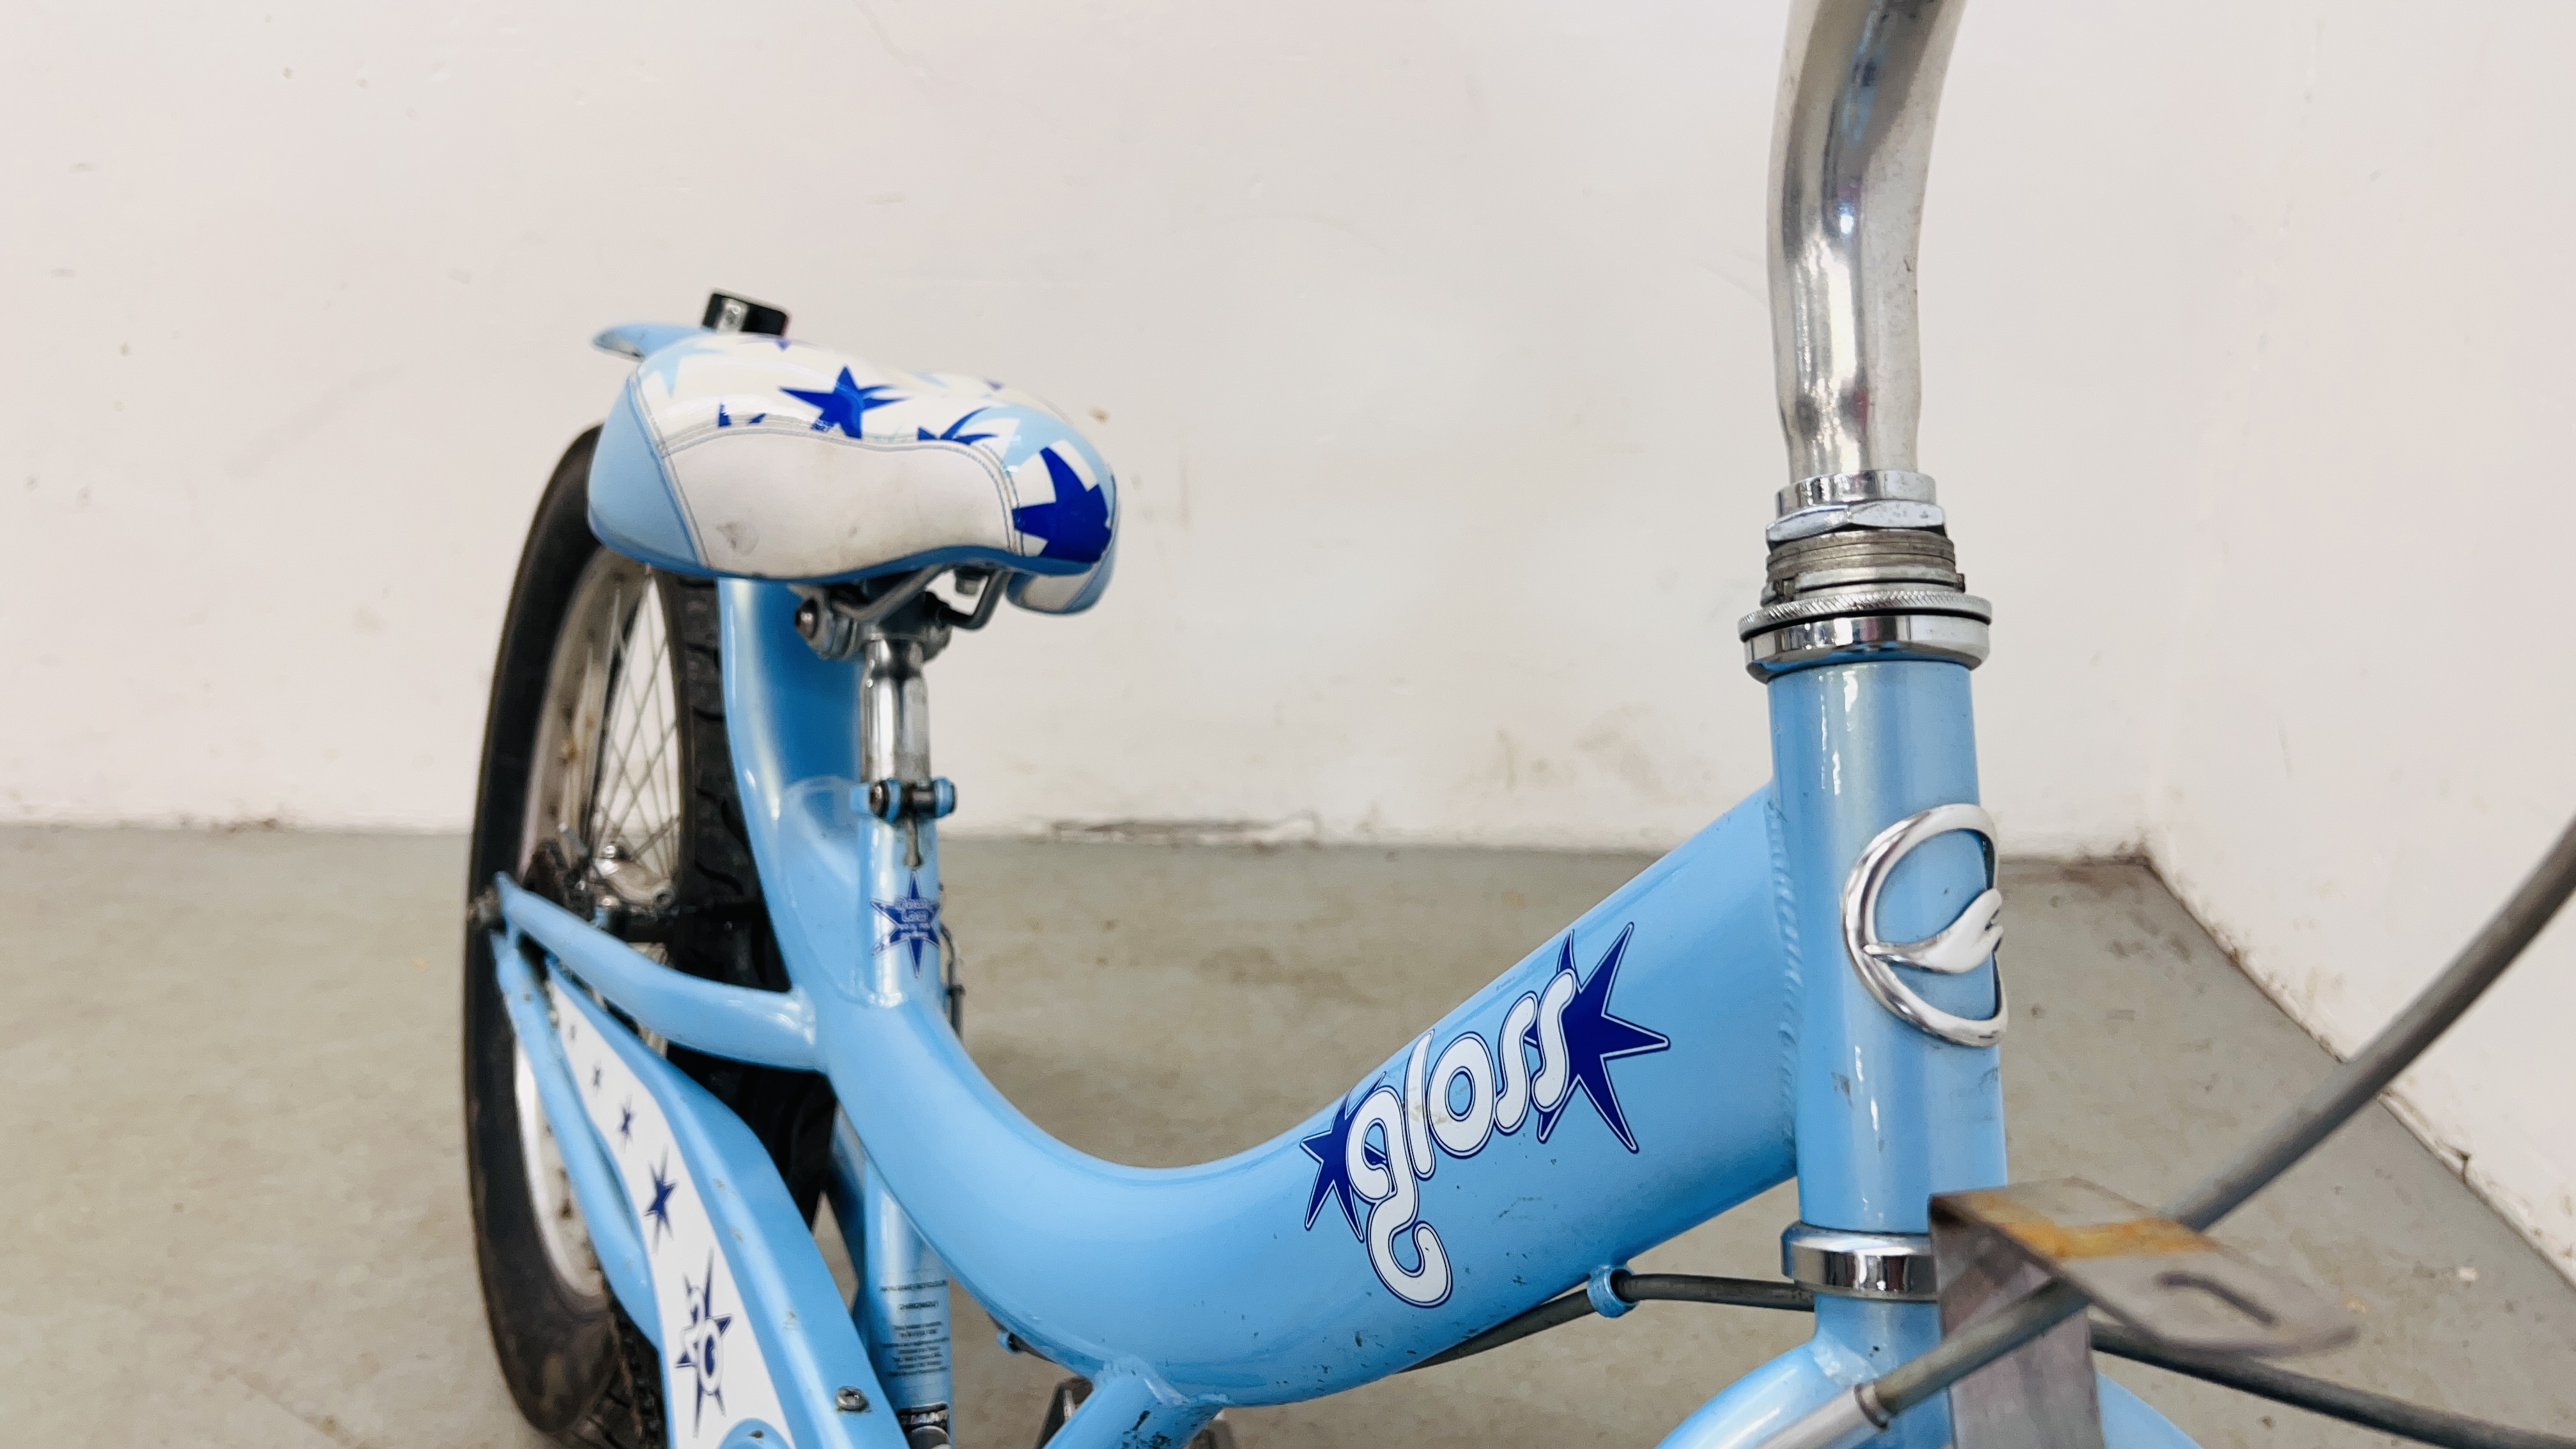 A GIRLS CRUISER STYLE GLOSS BICYCLE (BLUE). - Image 11 of 13